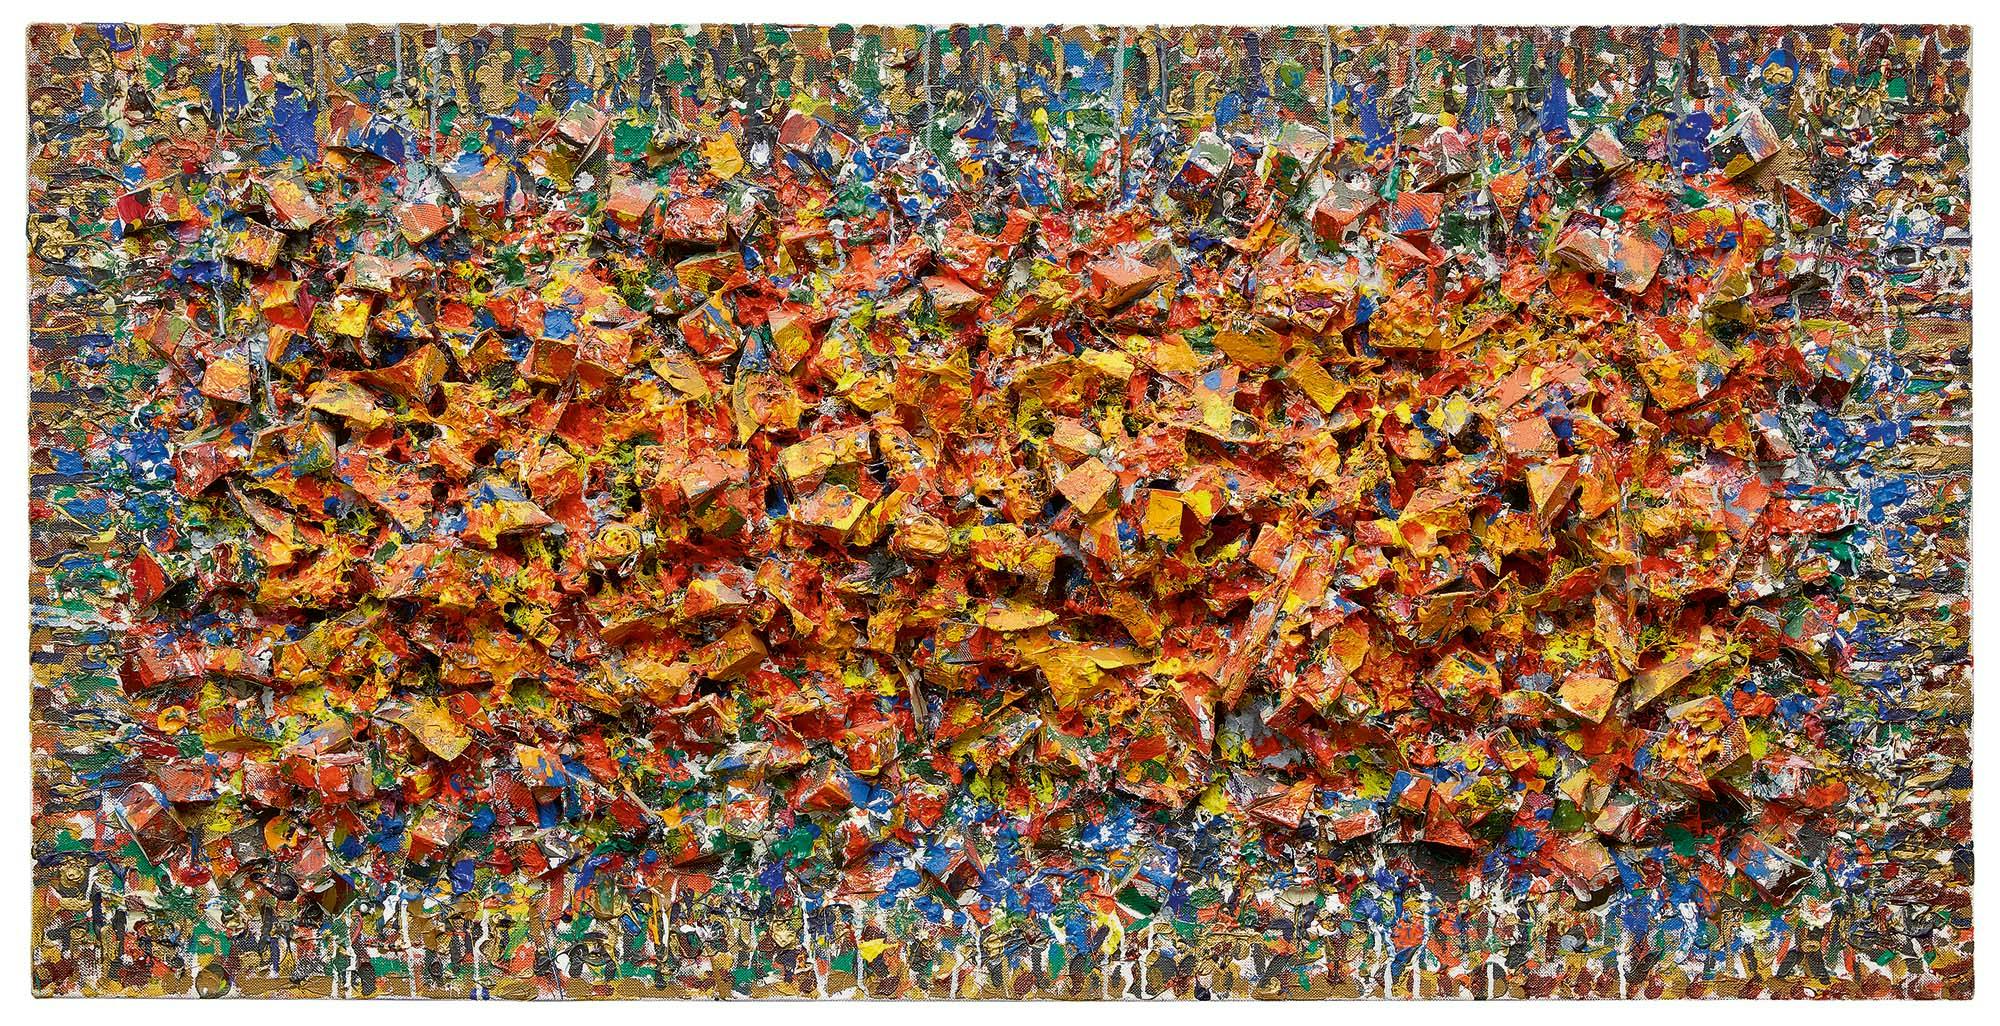 Golden Crystal
1986
Acrylic and mixed media on linen
33 x 66 in. (83.8 x 167.6 cm)
 – The Richard Pousette-Dart Foundation